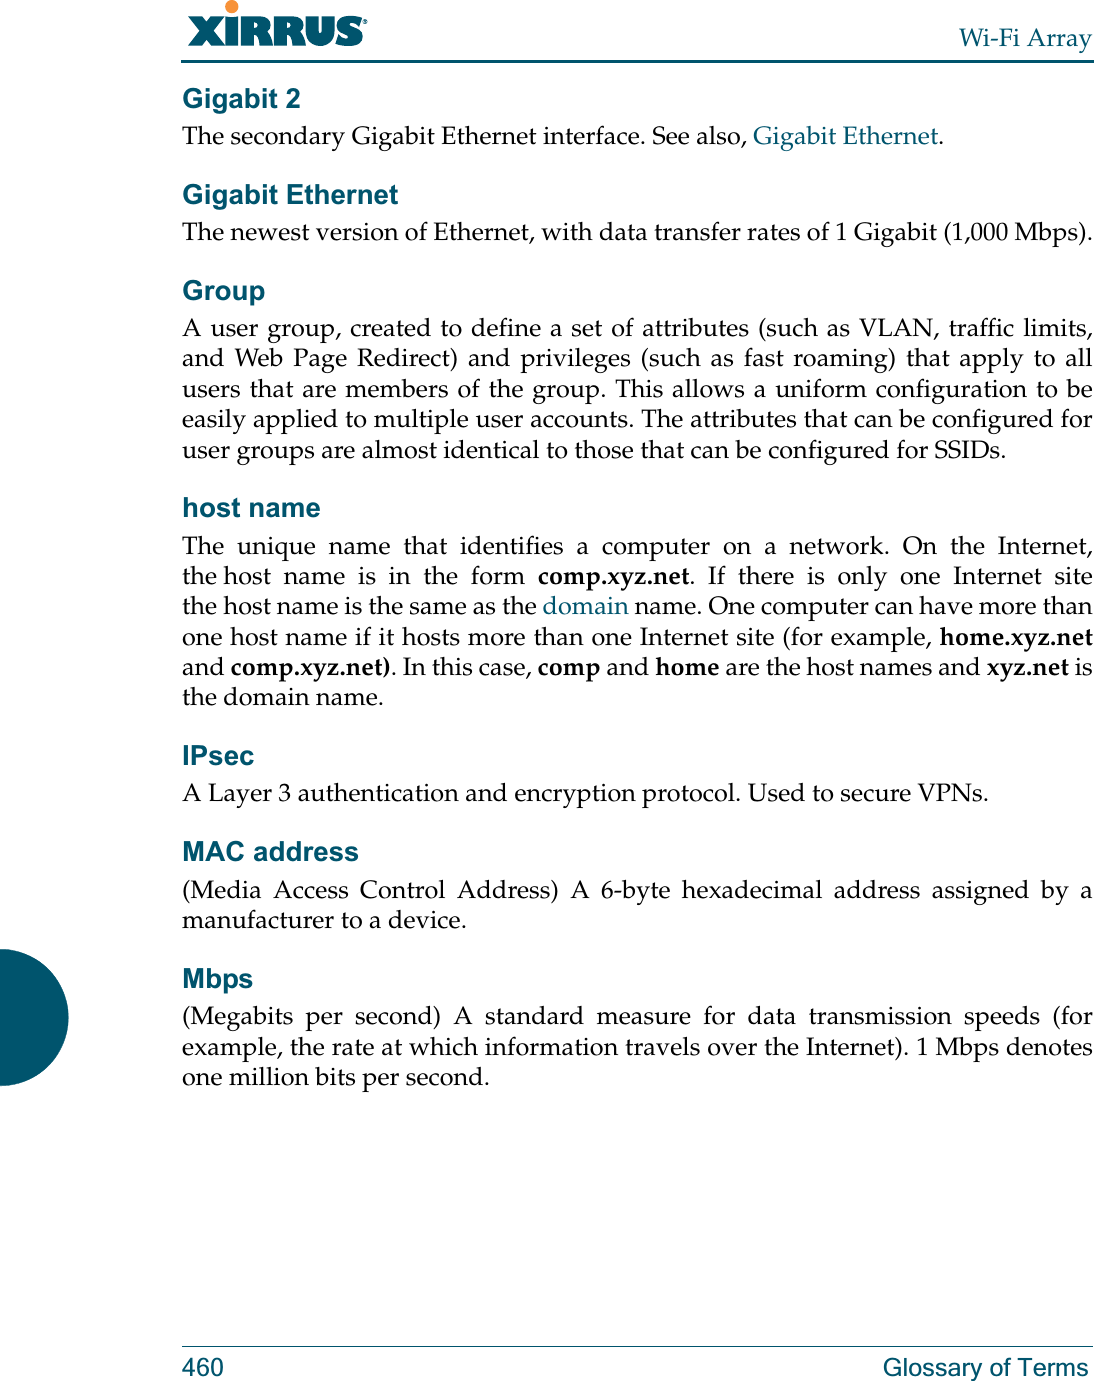 Wi-Fi Array460 Glossary of TermsGigabit 2The secondary Gigabit Ethernet interface. See also, Gigabit Ethernet.Gigabit EthernetThe newest version of Ethernet, with data transfer rates of 1 Gigabit (1,000 Mbps).GroupA user group, created to define a set of attributes (such as VLAN, traffic limits, and Web Page Redirect) and privileges (such as fast roaming) that apply to all users that are members of the group. This allows a uniform configuration to be easily applied to multiple user accounts. The attributes that can be configured for user groups are almost identical to those that can be configured for SSIDs. host nameThe unique name that identifies a computer on a network. On the Internet, the host name is in the form comp.xyz.net. If there is only one Internet site the host name is the same as the domain name. One computer can have more than one host name if it hosts more than one Internet site (for example, home.xyz.netand comp.xyz.net). In this case, comp and home are the host names and xyz.net is the domain name.IPsecA Layer 3 authentication and encryption protocol. Used to secure VPNs.MAC address(Media Access Control Address) A 6-byte hexadecimal address assigned by a manufacturer to a device.Mbps(Megabits per second) A standard measure for data transmission speeds (for example, the rate at which information travels over the Internet). 1 Mbps denotes one million bits per second.